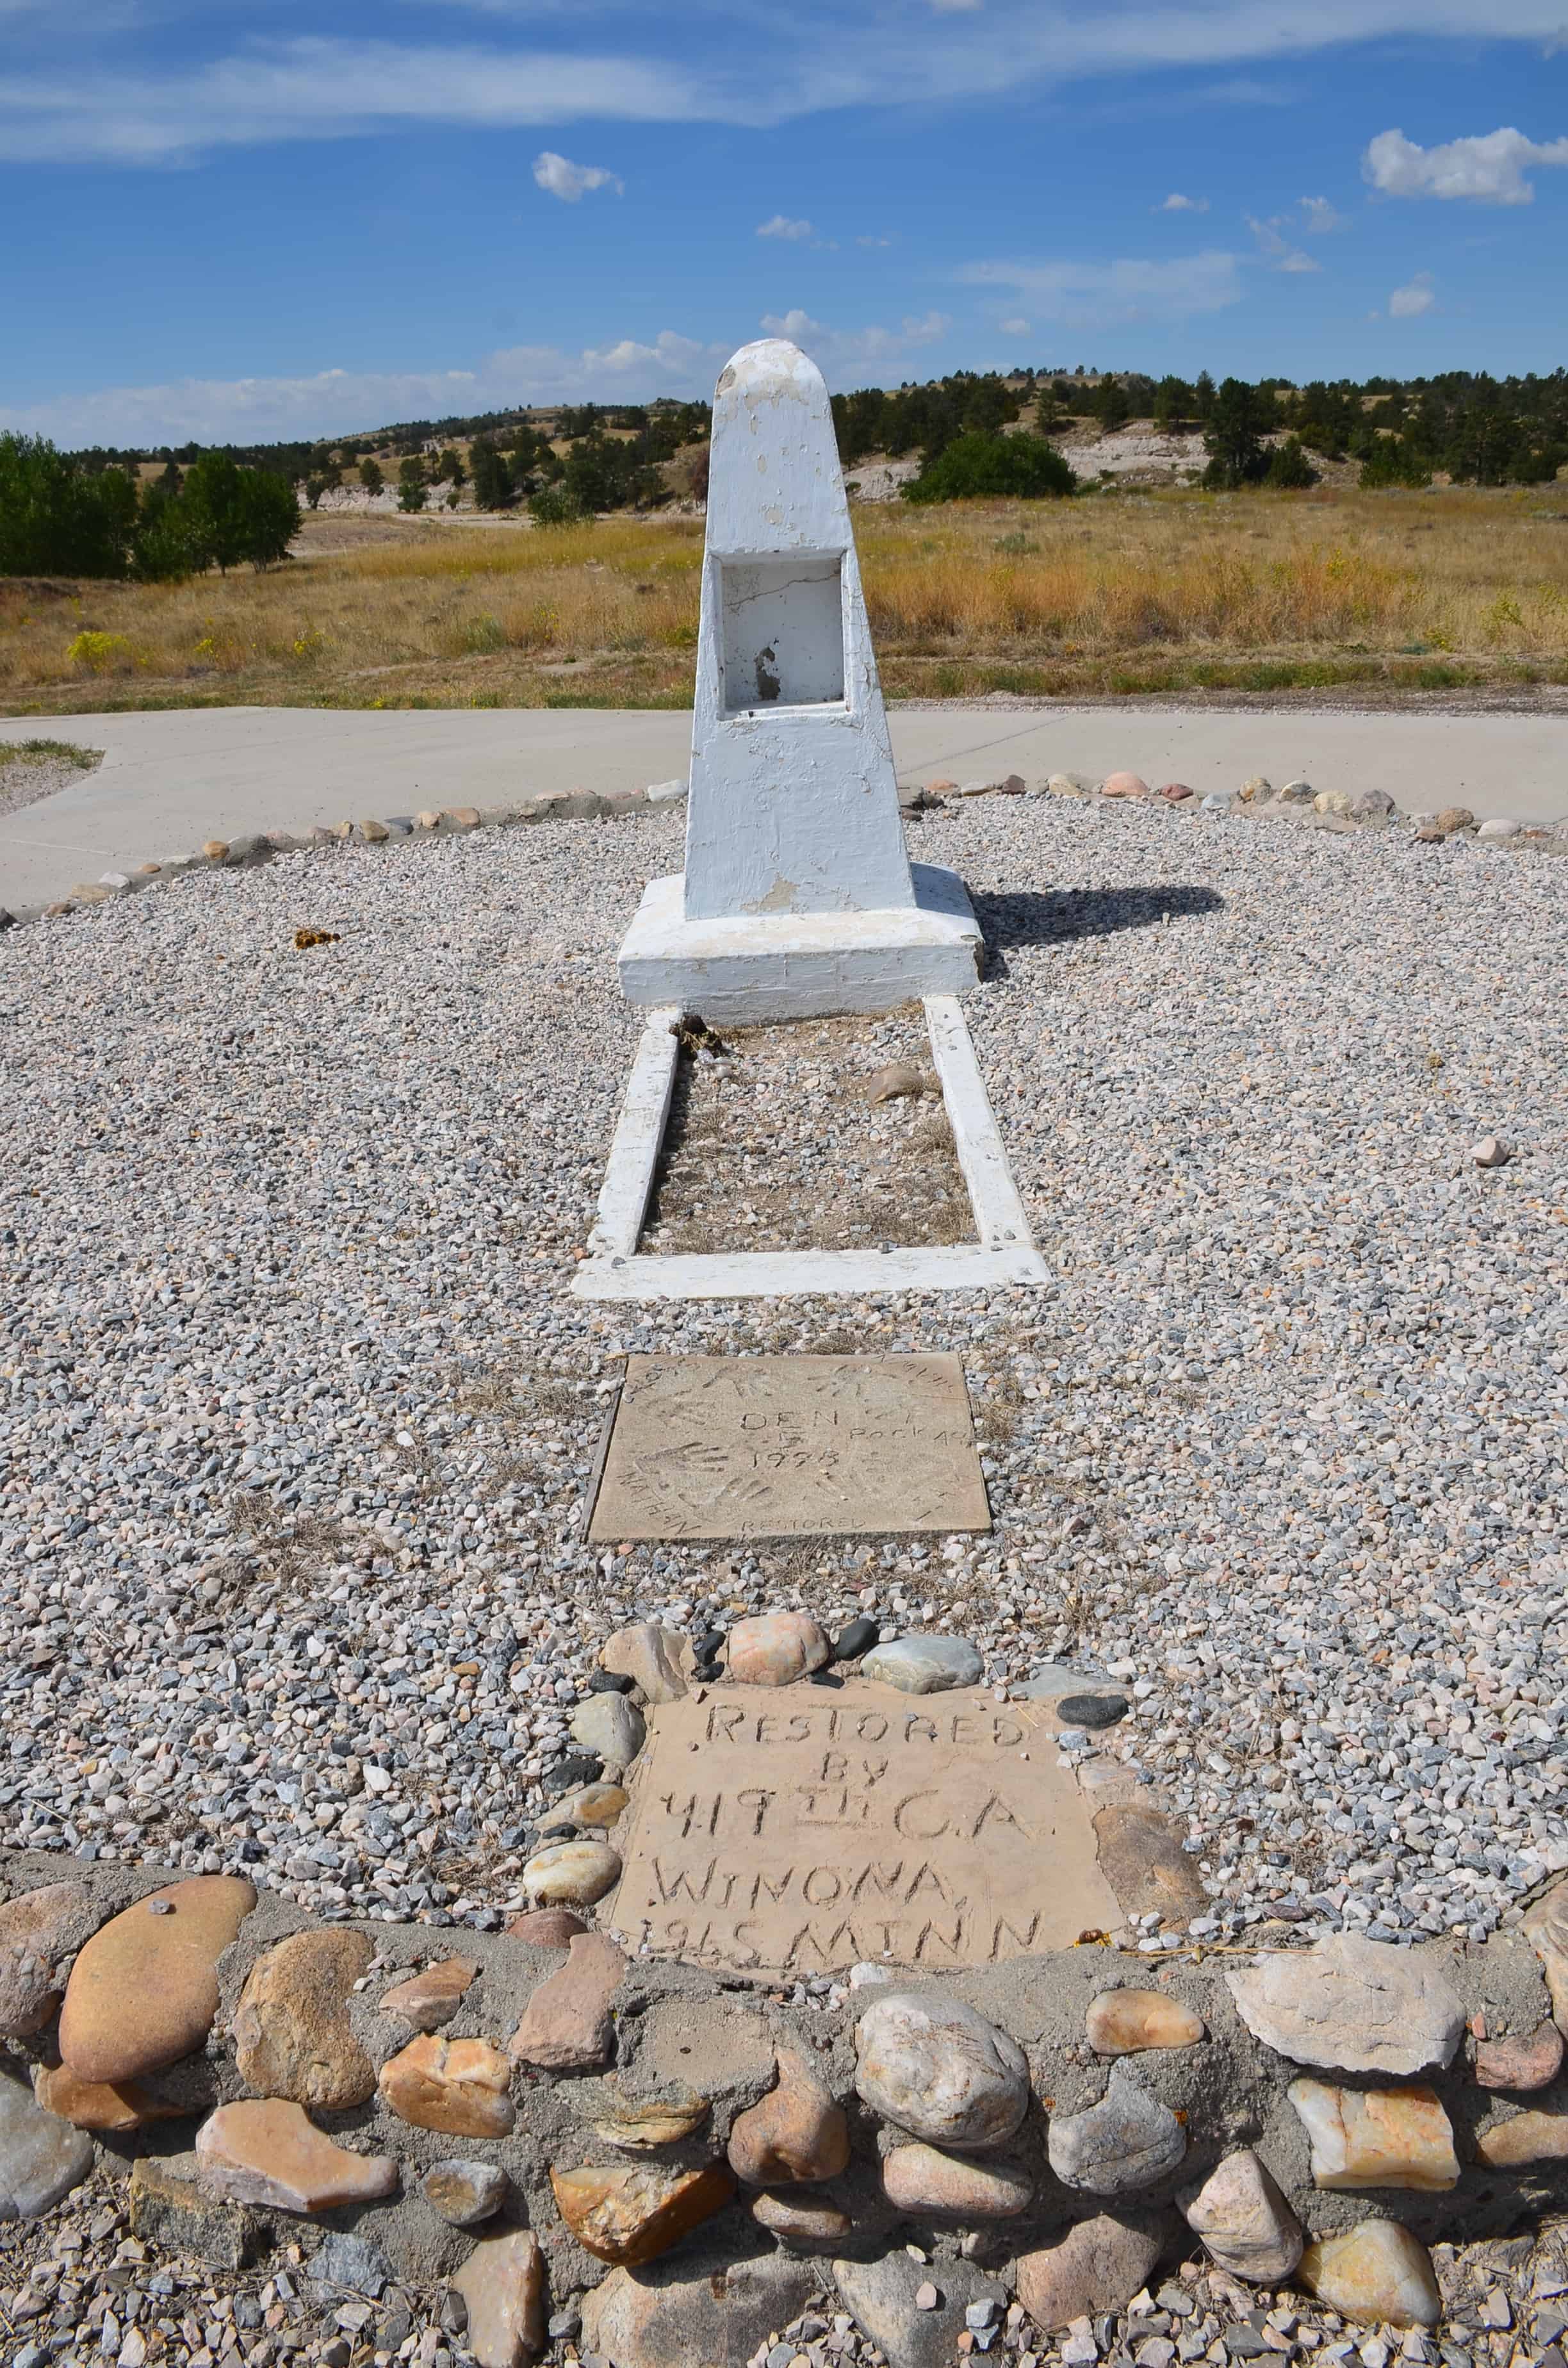 Lucindy Rollins gravesite near Oregon Trail Ruts State Historic Site in Wyoming